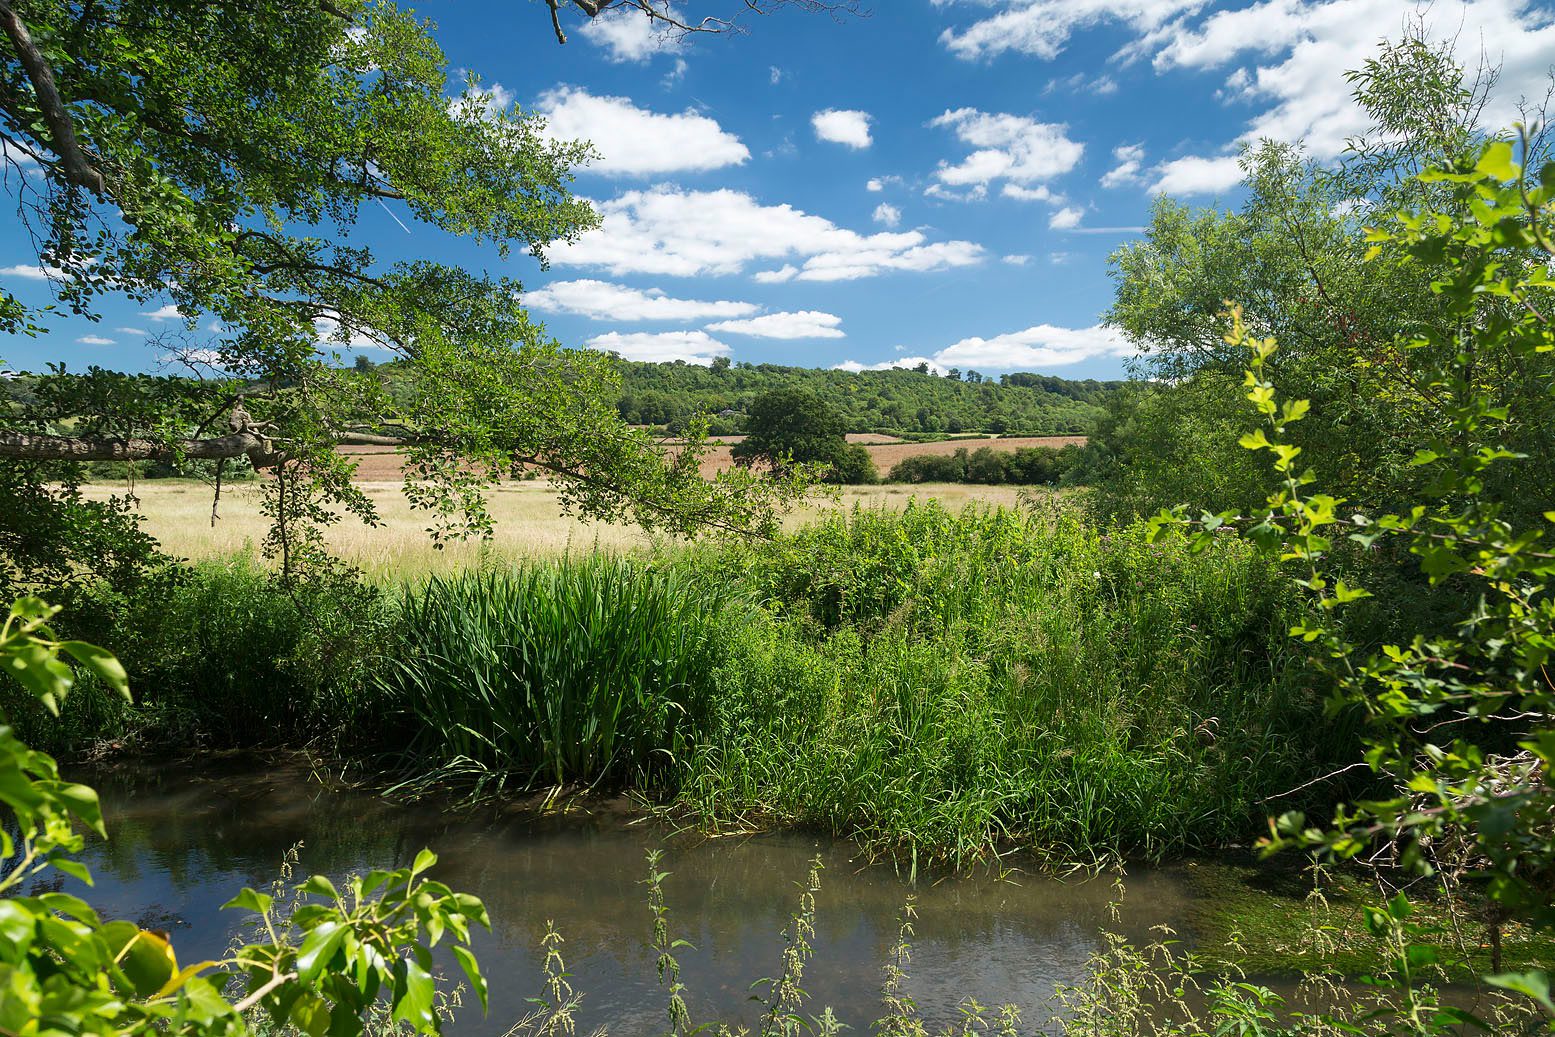 Chalk stream with open fields, overhanging trees and blue skies with white clouds